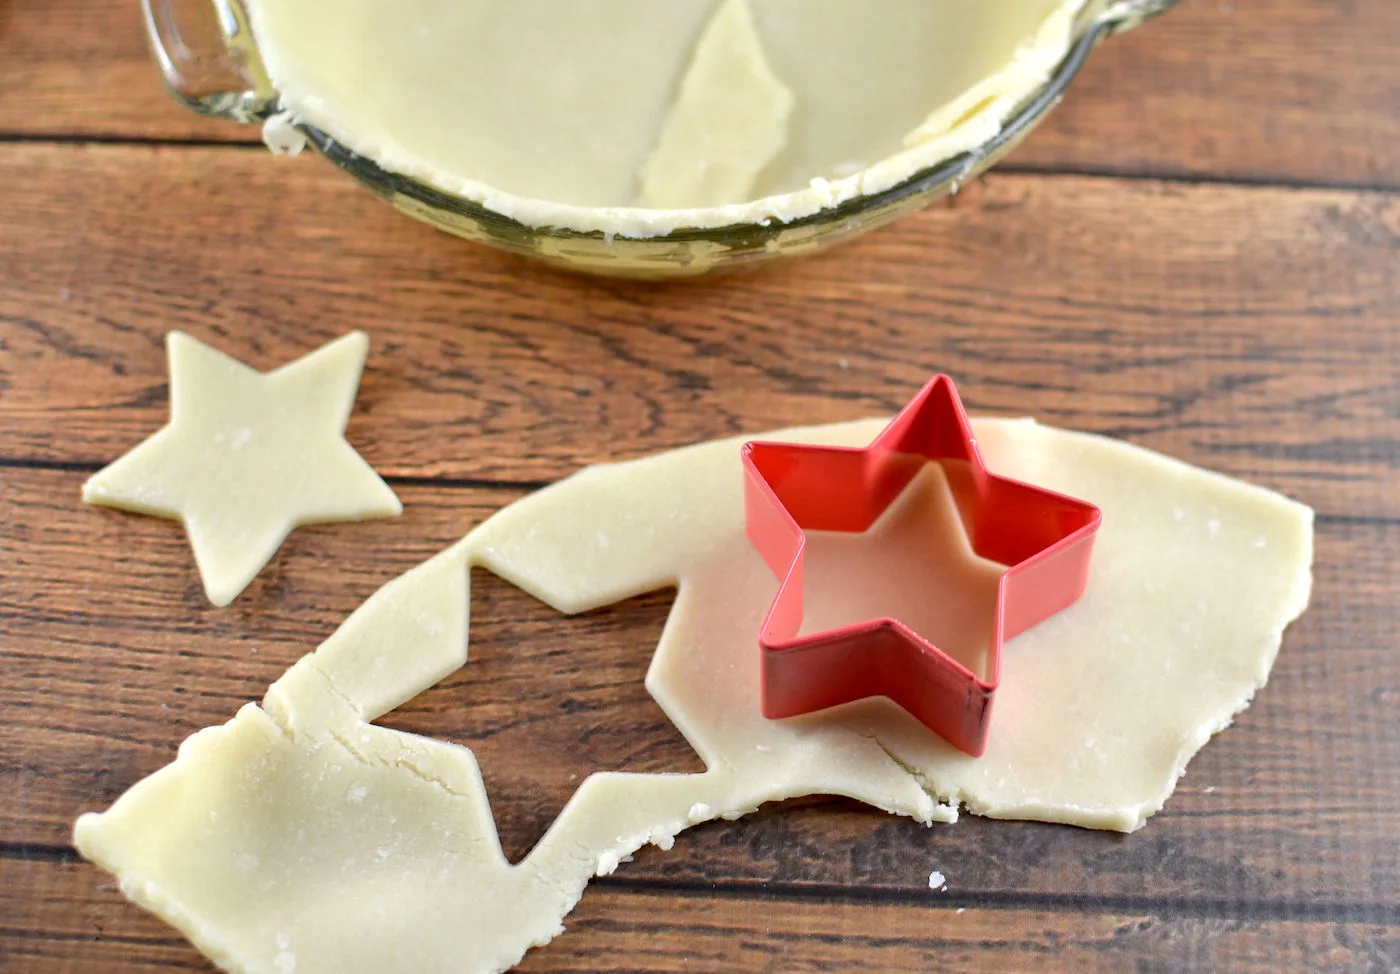 Cutting stars out of pie crust